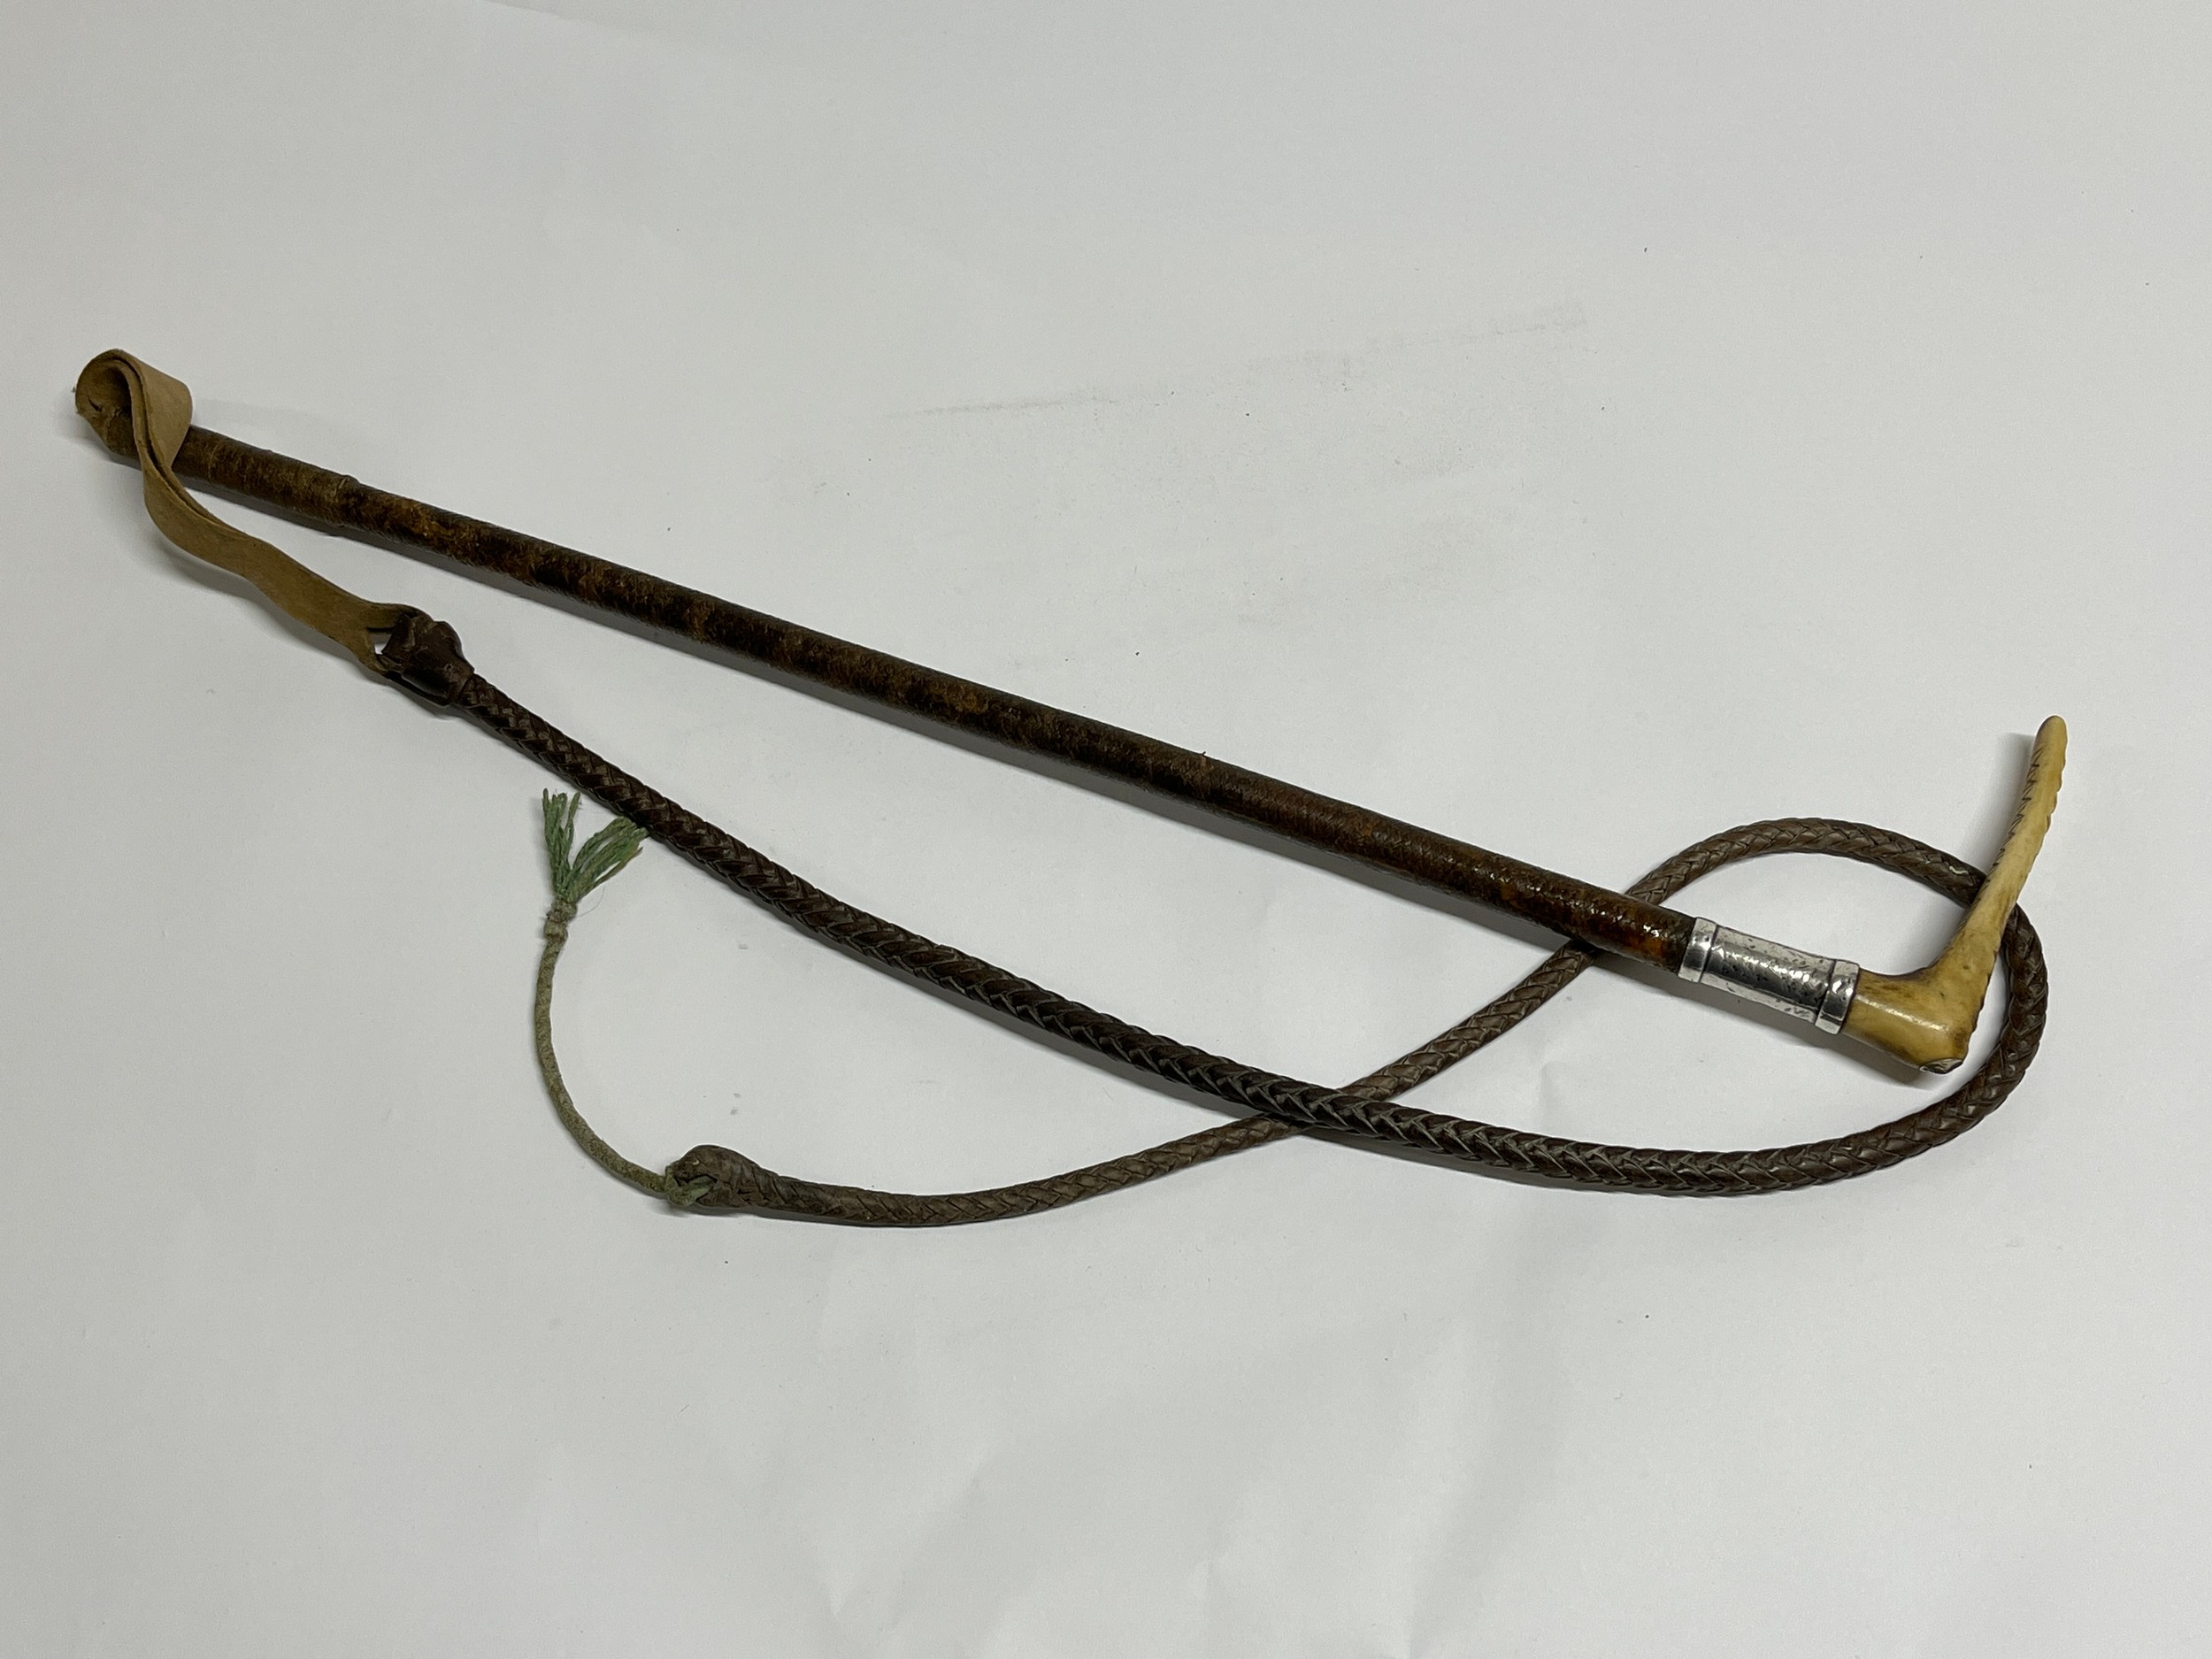 A vintage carriage whip, leather shaft with silver collar and horn top, knotted leather thong